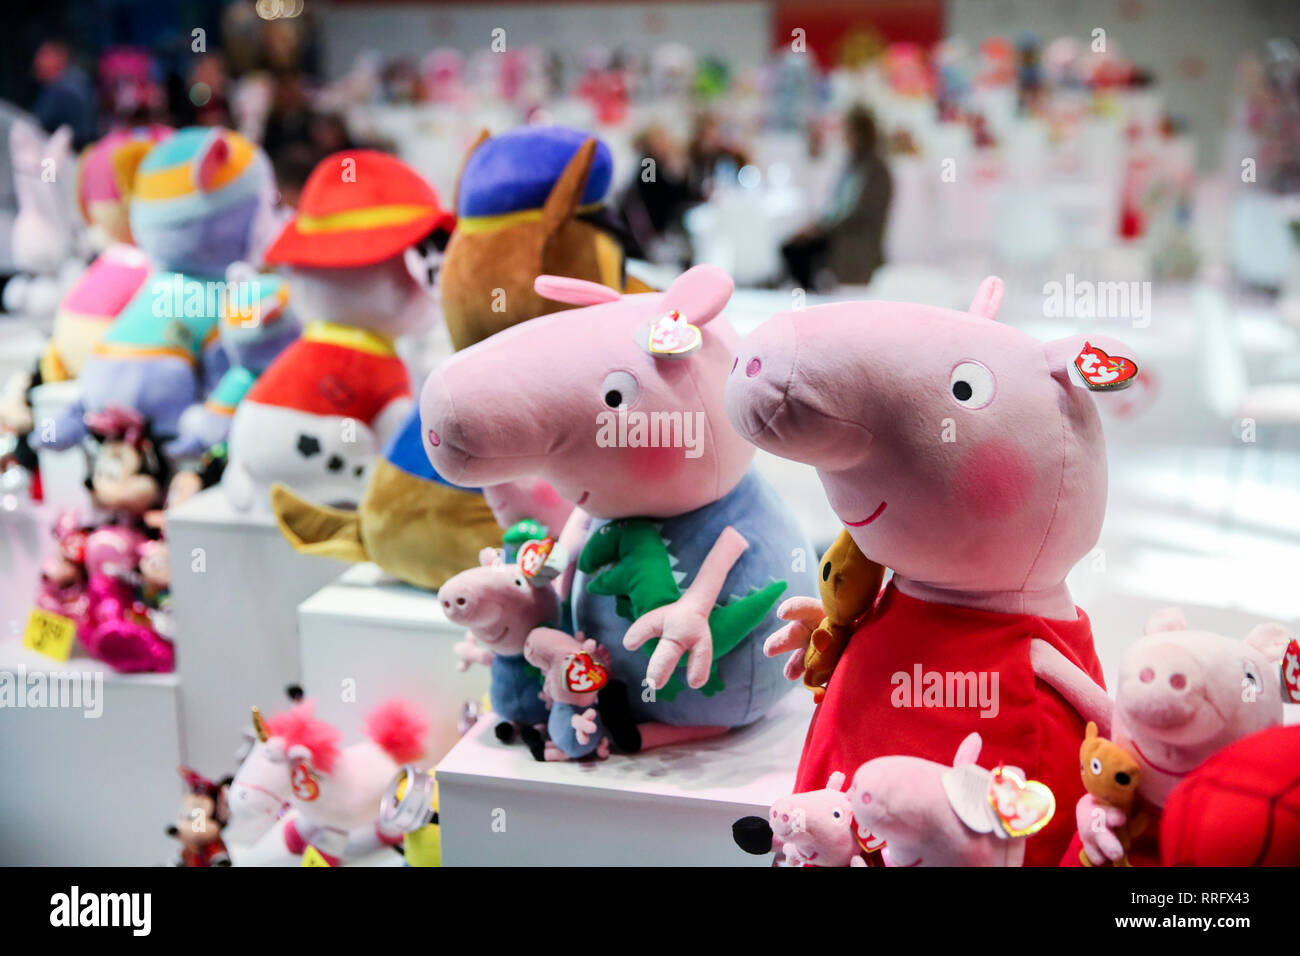 (190226) -- BEIJING, Feb. 26, 2019 (Xinhua) -- Stuffed toys are seen at the booth of Ty Inc. during the 116th Annual North American International Toy Fair at the Jacob K. Javits Convention Center in New York, the United States, on Feb. 19, 2019. (Xinhua/Wang Ying) Stock Photo